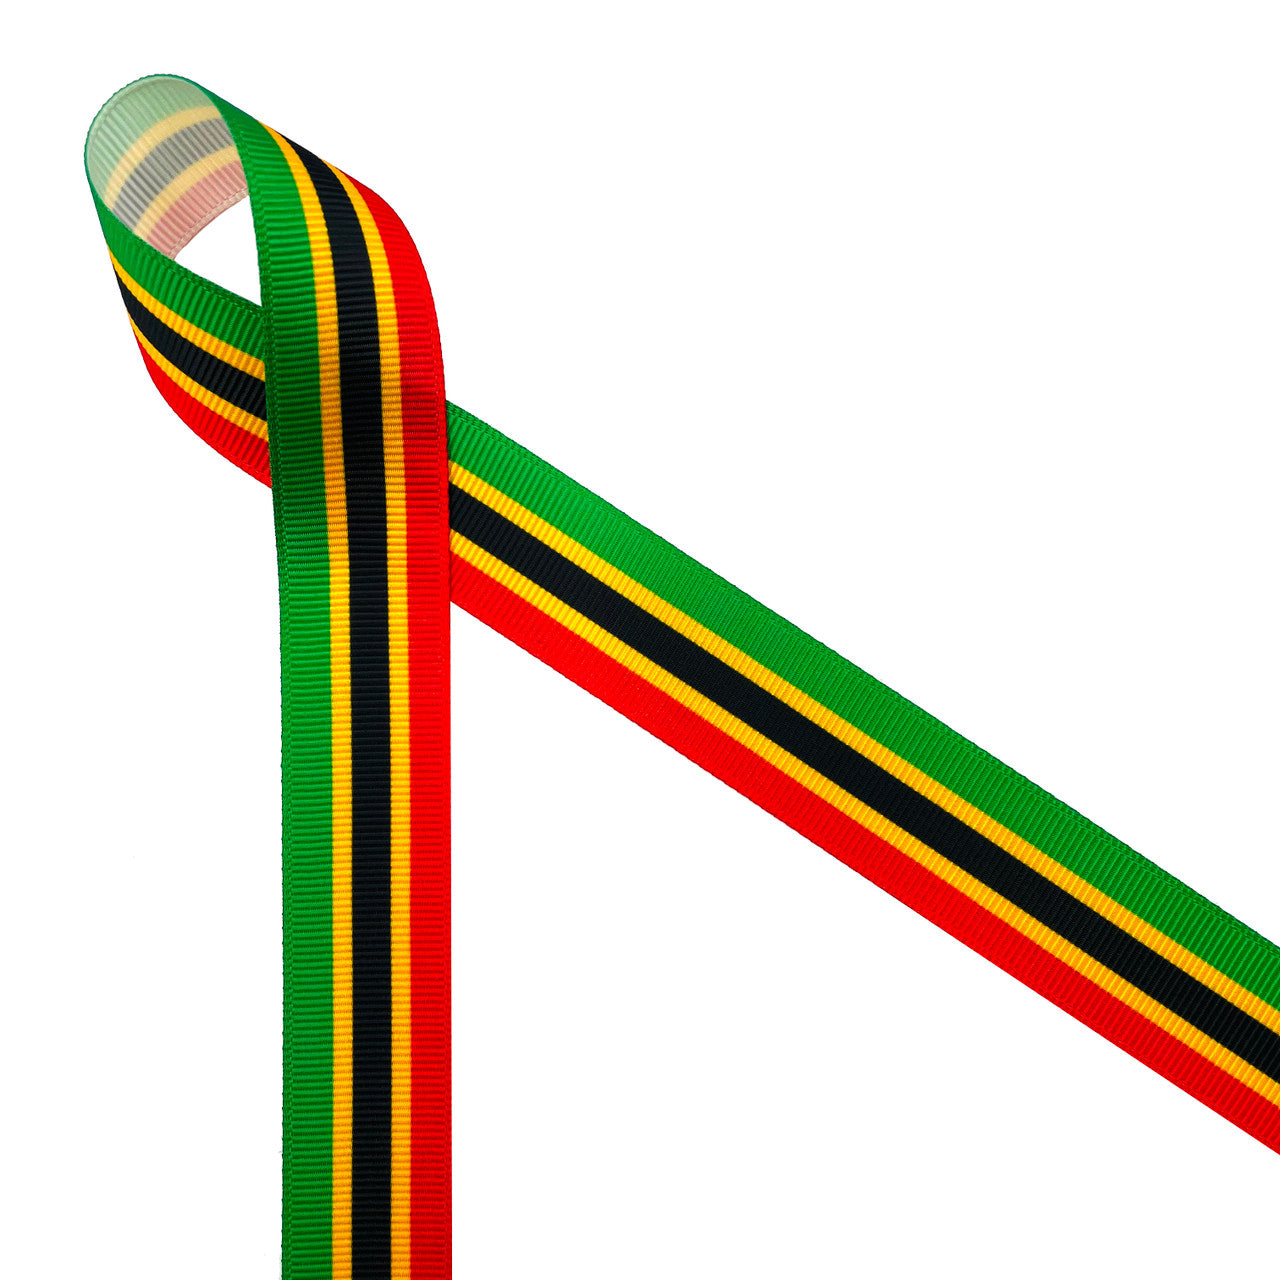 African Kente ribbon stripes of red, black, green and yellow printed on  7/8 white grosgrain, 10 yards